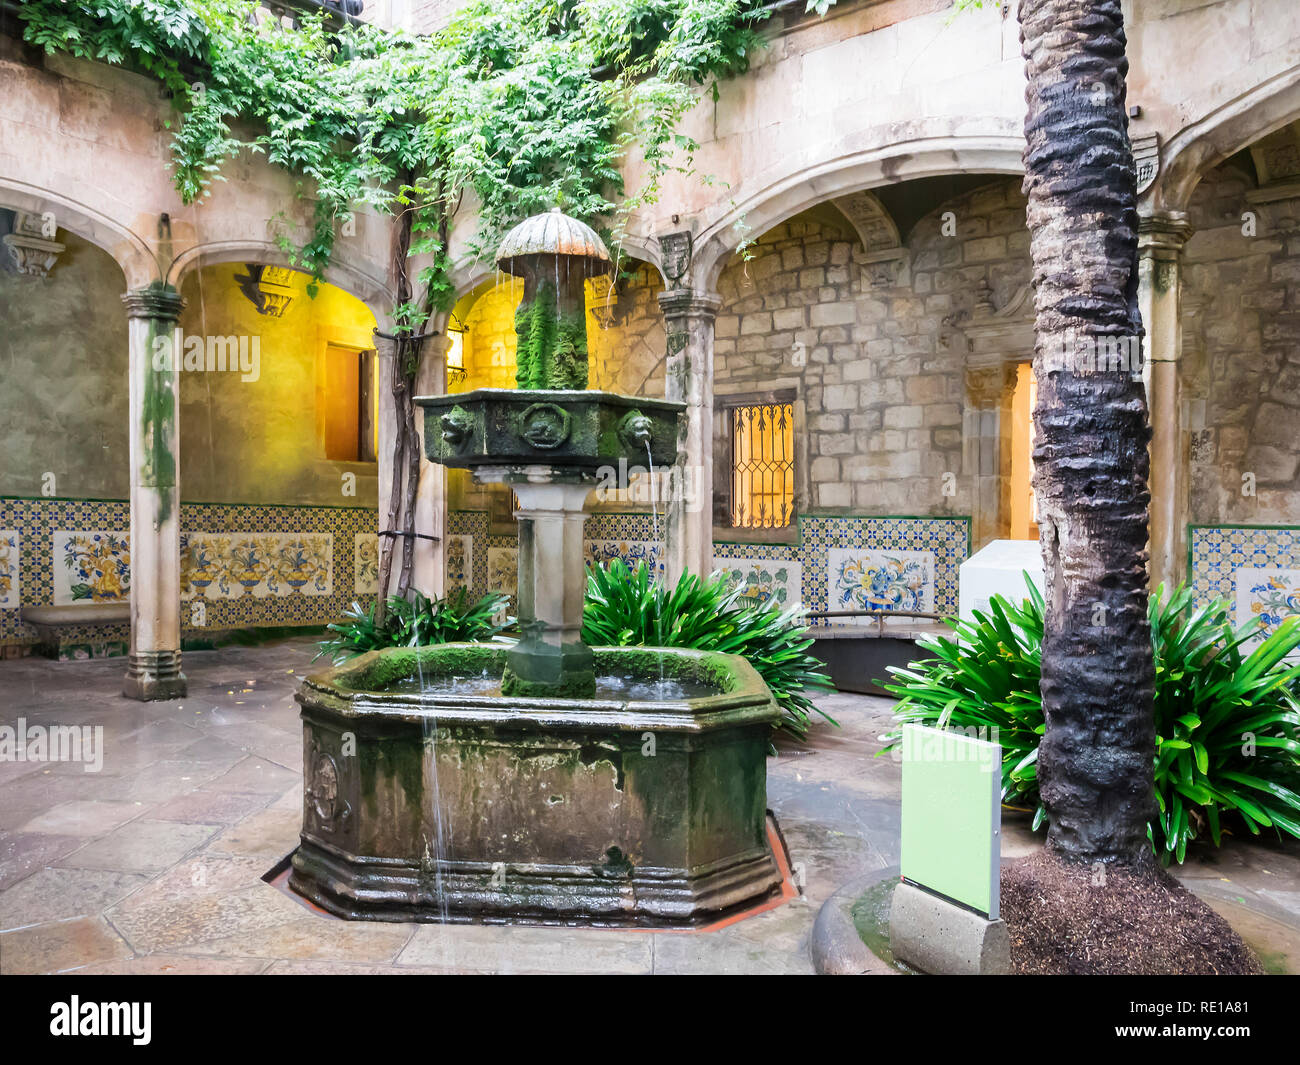 Barcelona, Spain, Nov 1, 2018: Typical spanish courtryard or patio with fountain and greenary. Beautiful archs and walls made of stone. No people. Stock Photo